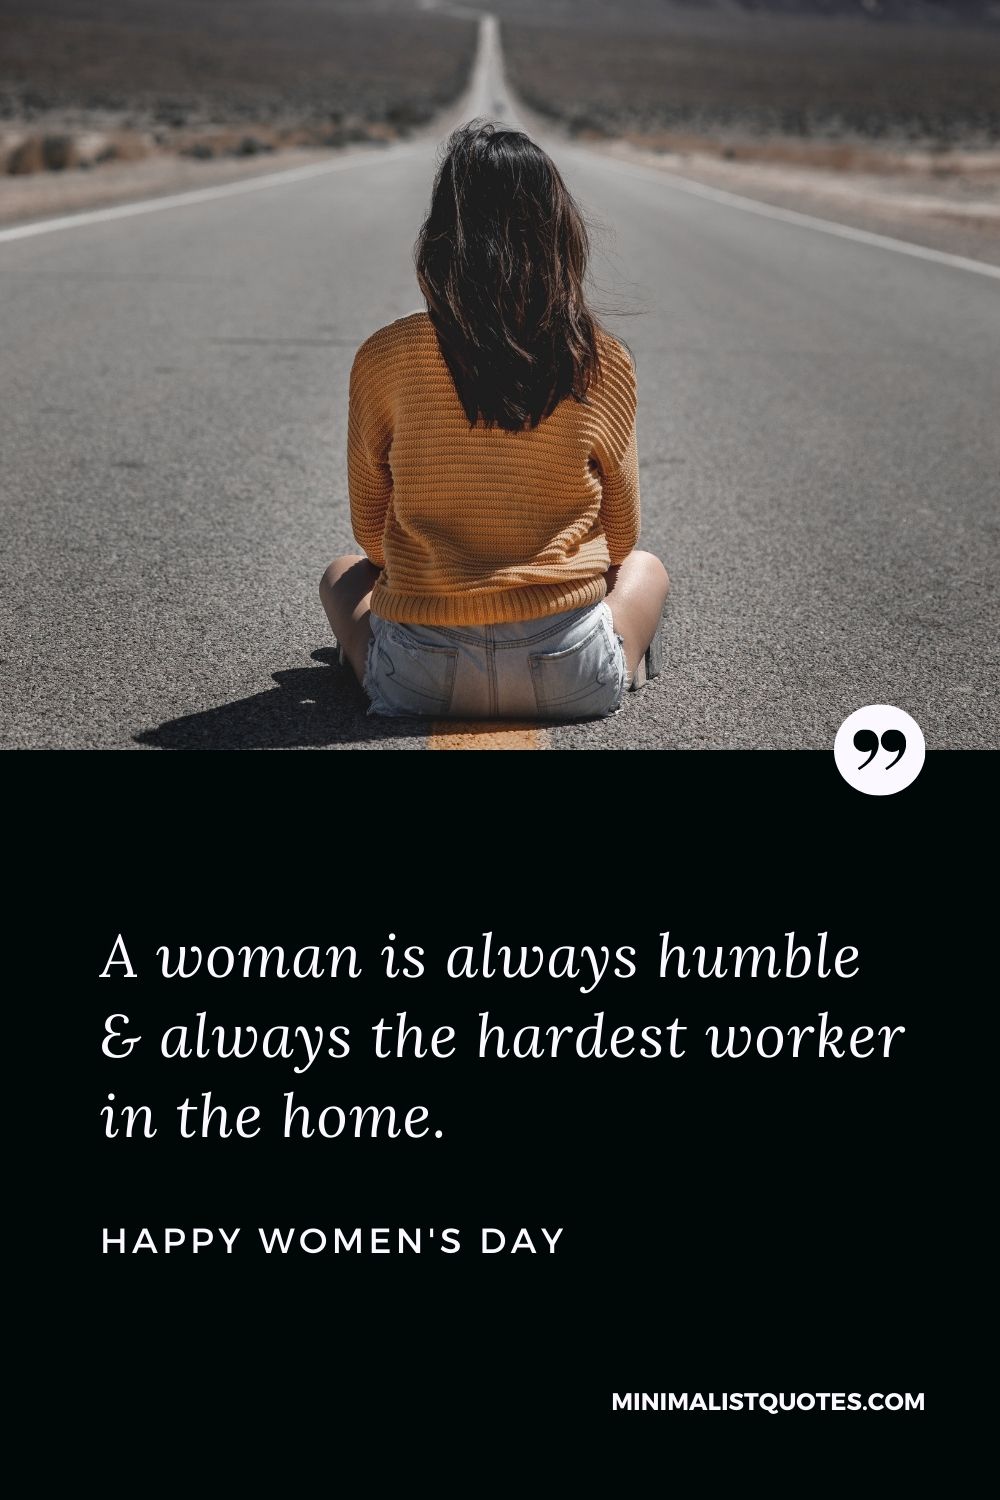 Women's Day Wish & Message: A woman is always humble & always the hardest worker in the home.